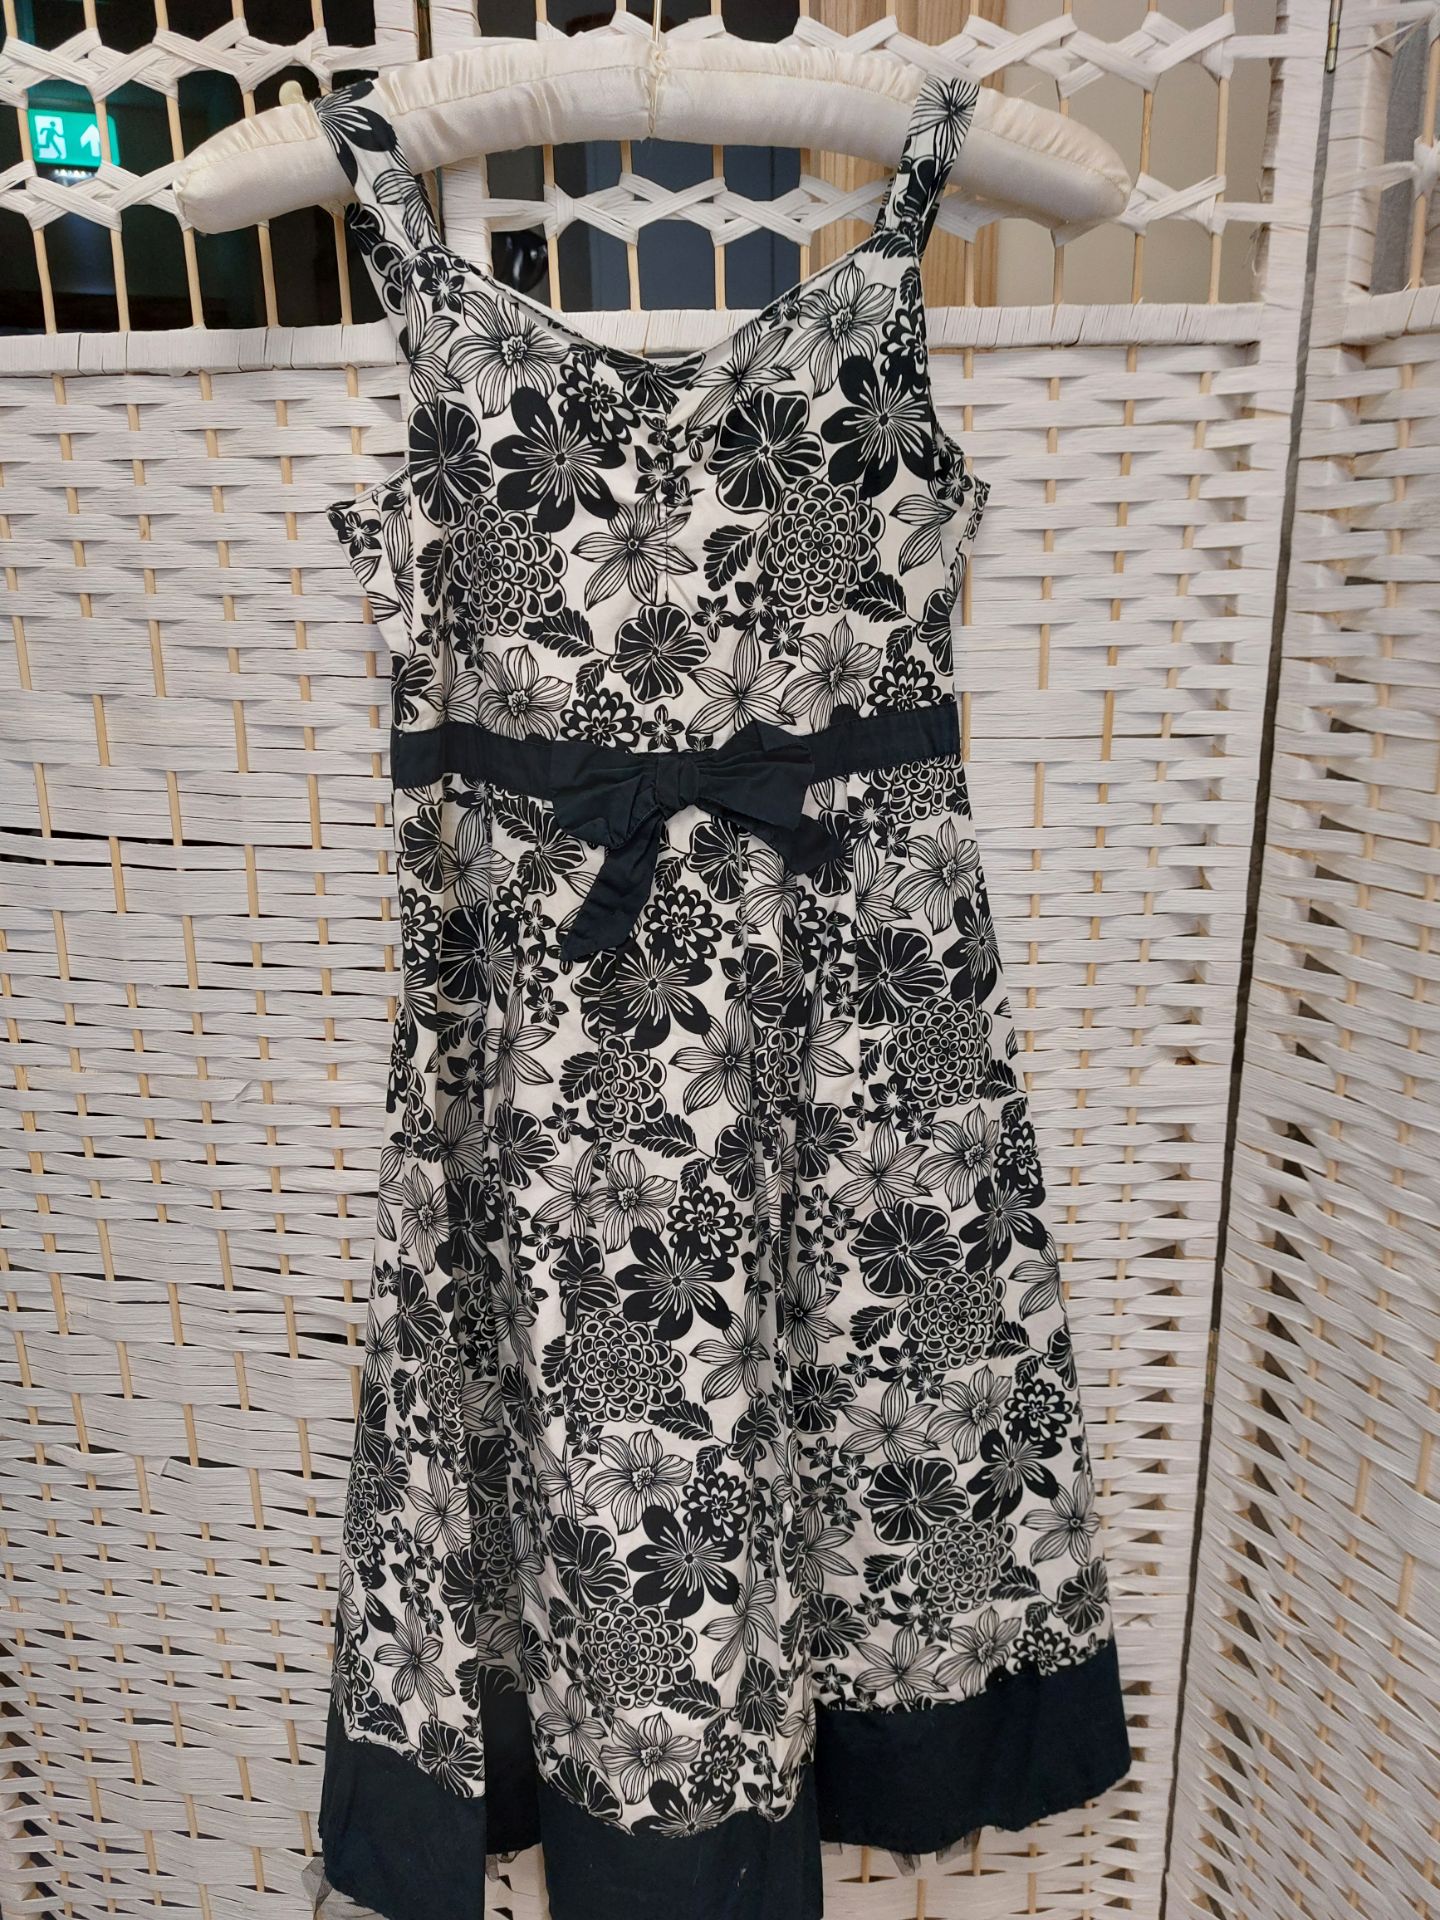 Black and White Child's Dress - Image 2 of 2